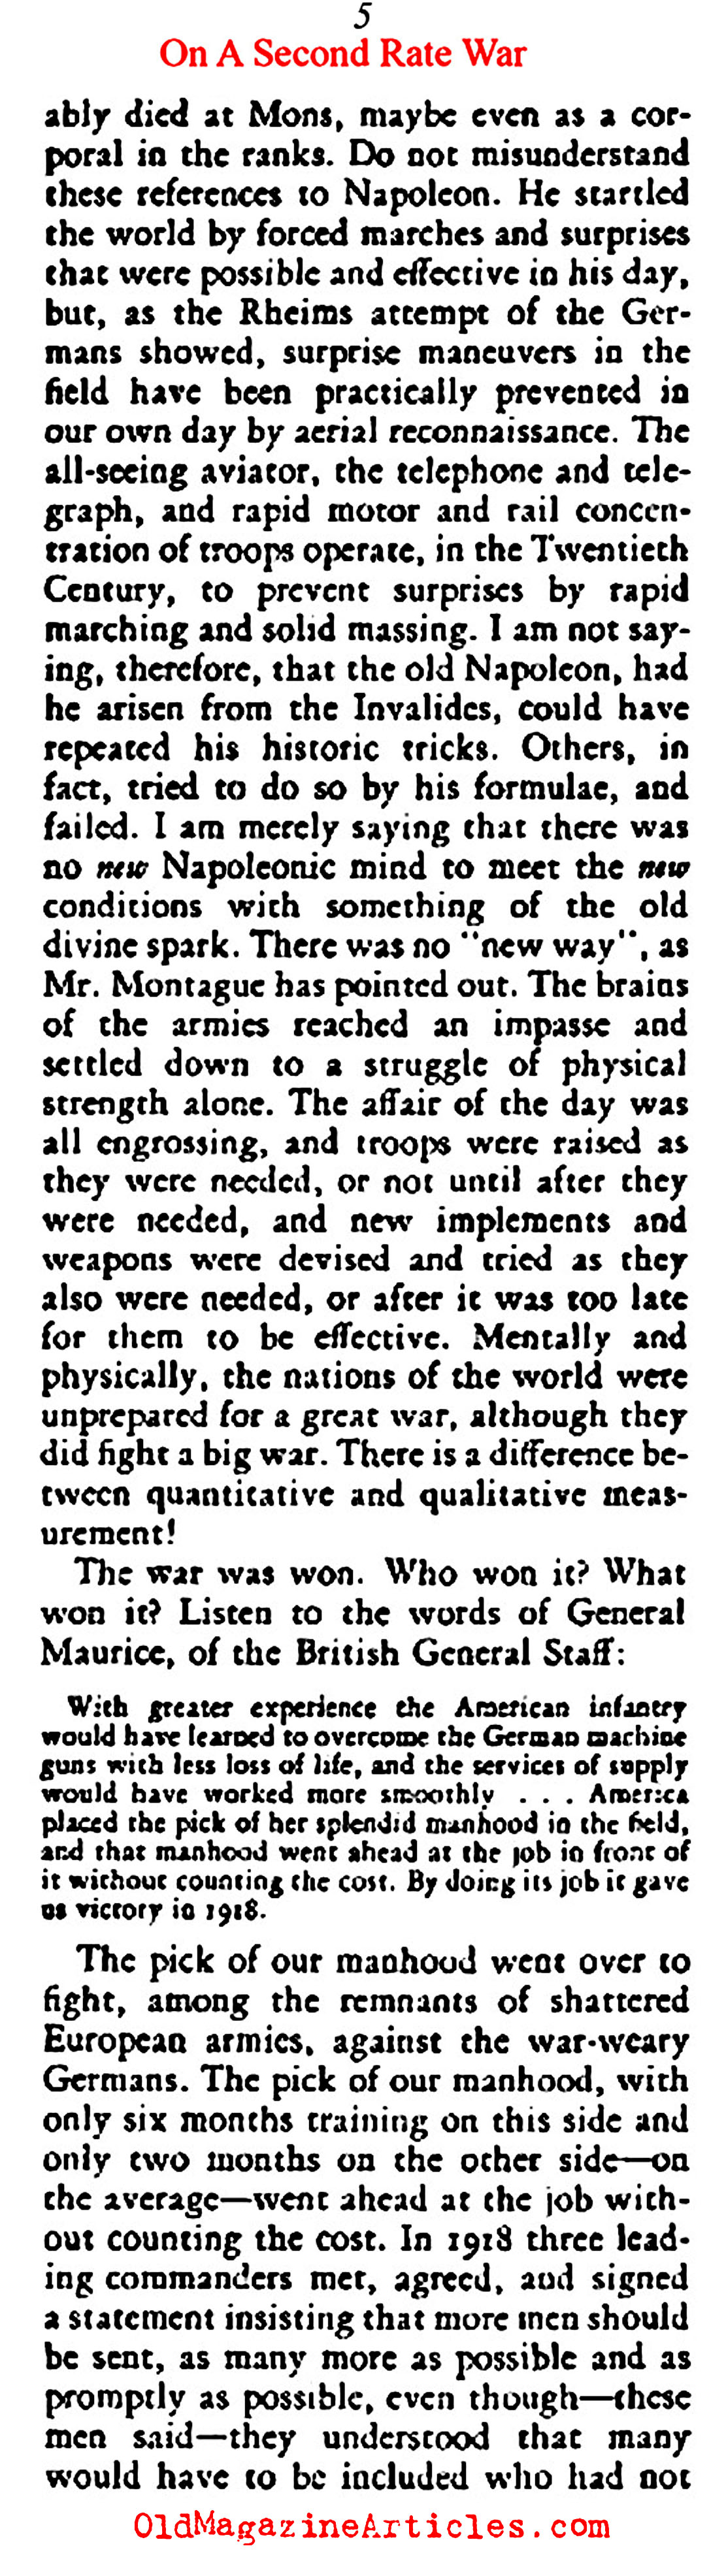 It was a Second Rate War (The American Mercury, 1924)